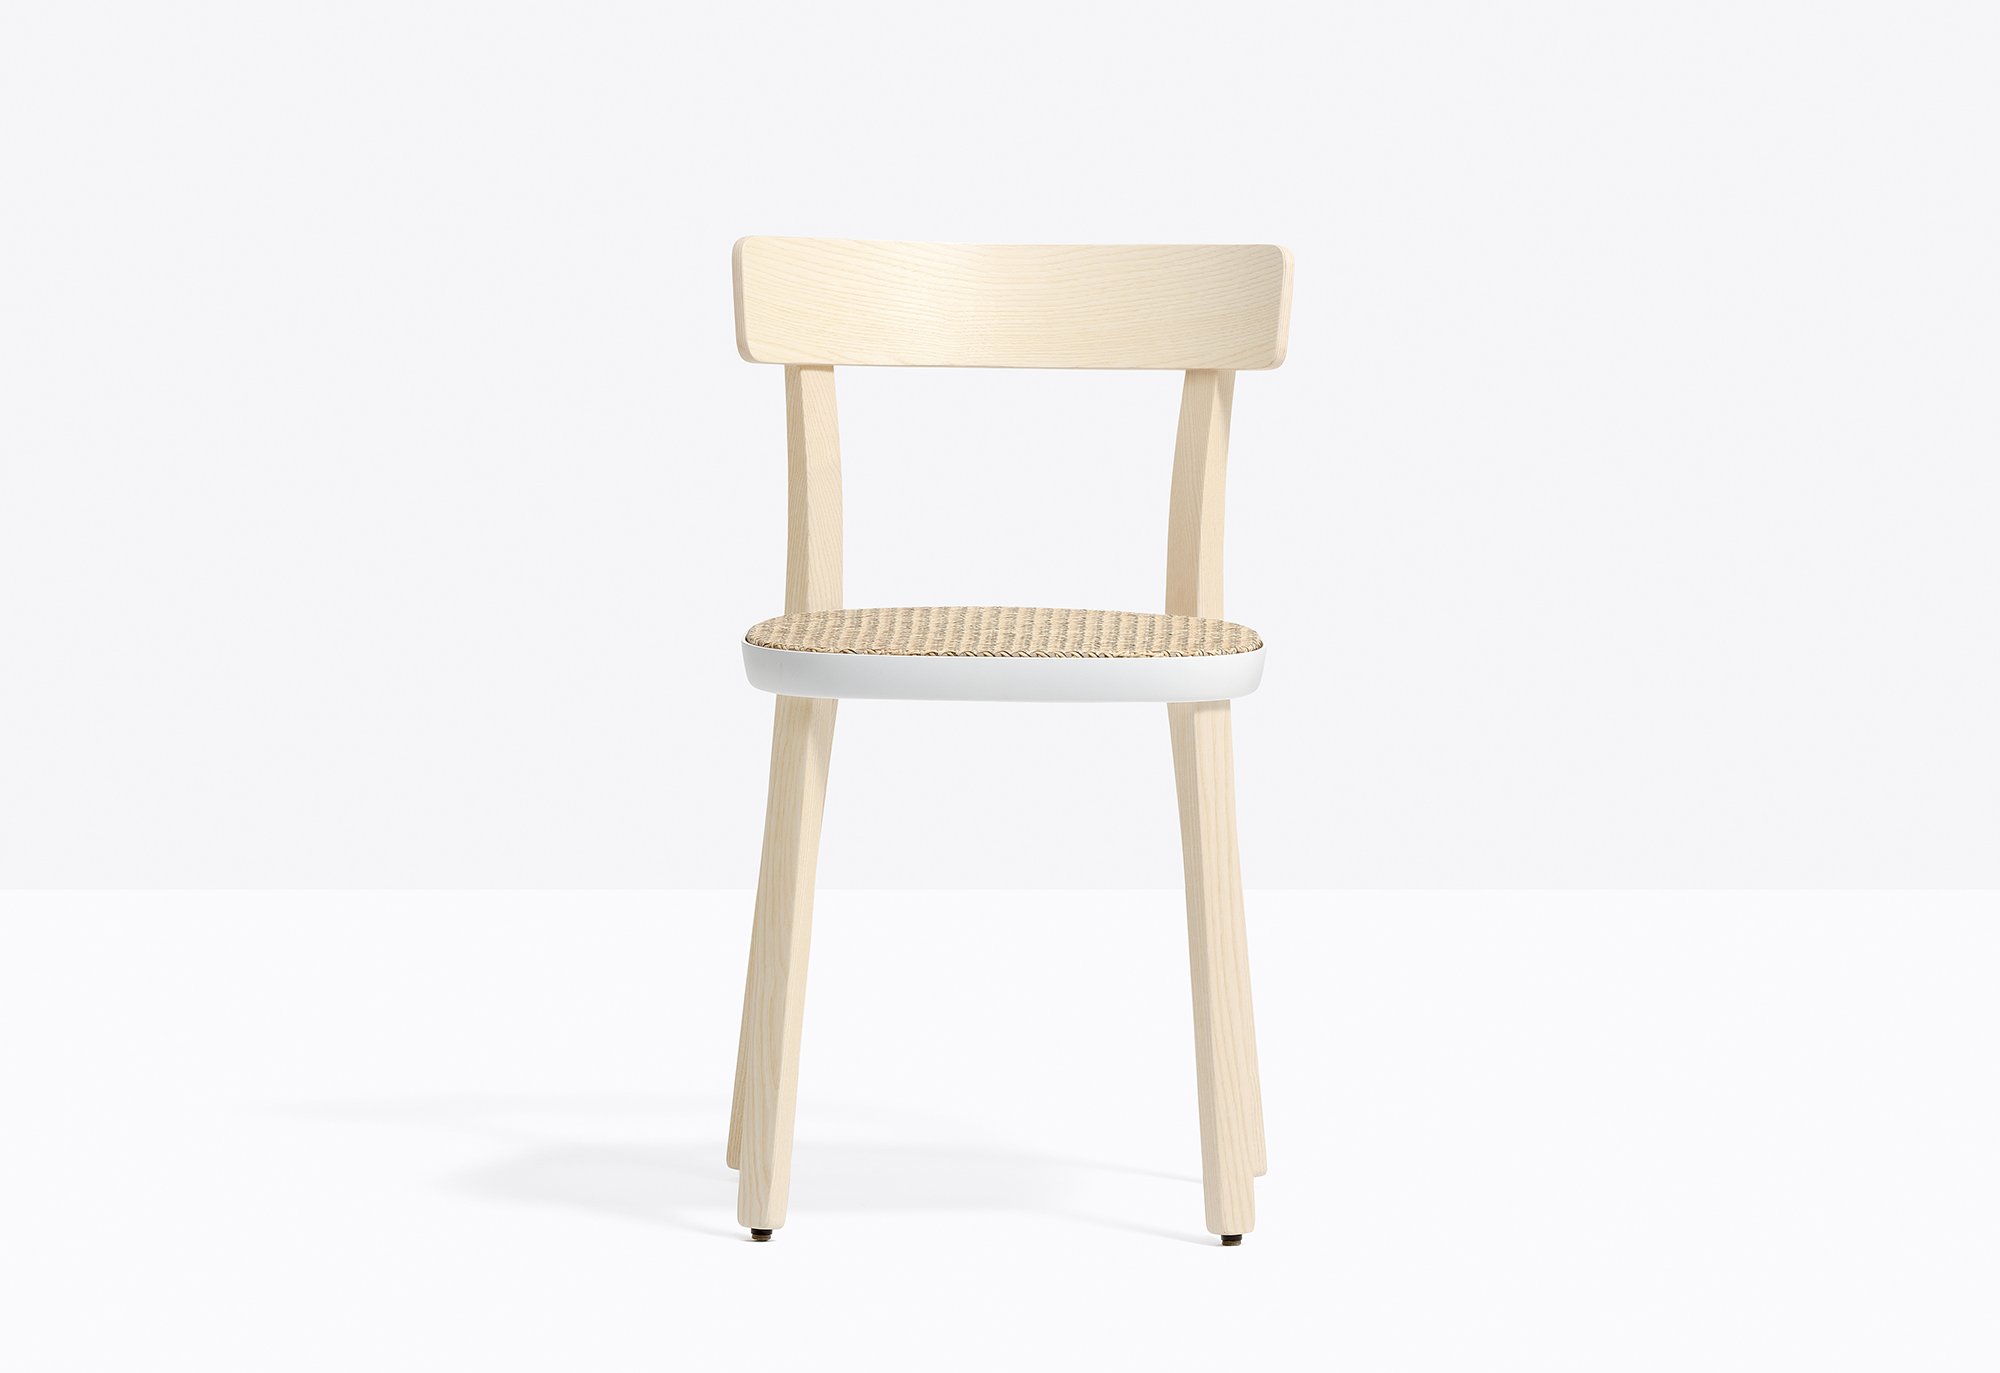 Folk Chair from Pedrali, designed by CMP Design